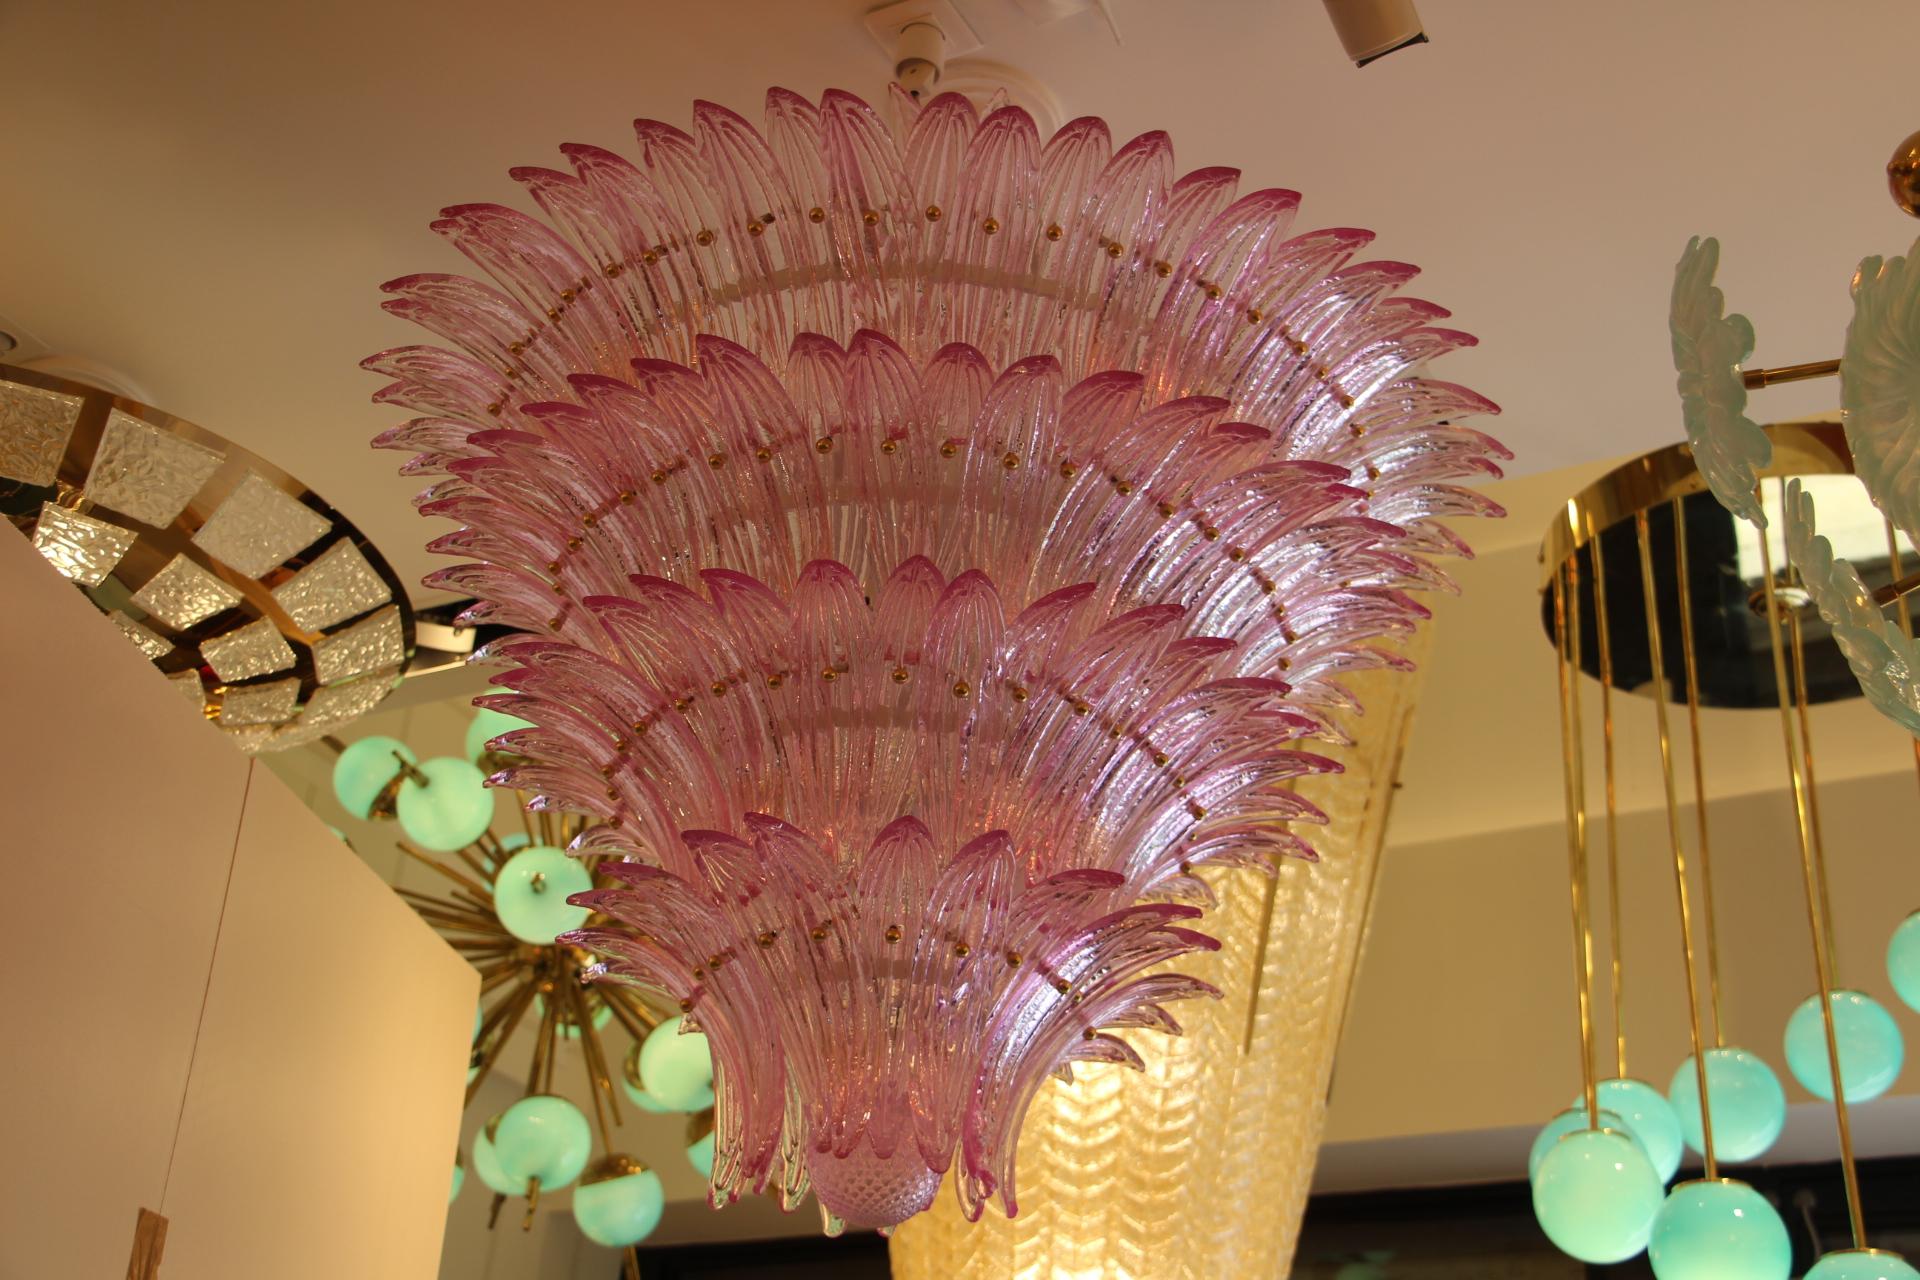 This spectacular chandelier features more than 150 hand made glass palmettes. It has got 4 tiers and a top one. Each glass palmette is fixed with a brass stud. Glass palmettes are all textured and show different nuances of pink.
Its color is